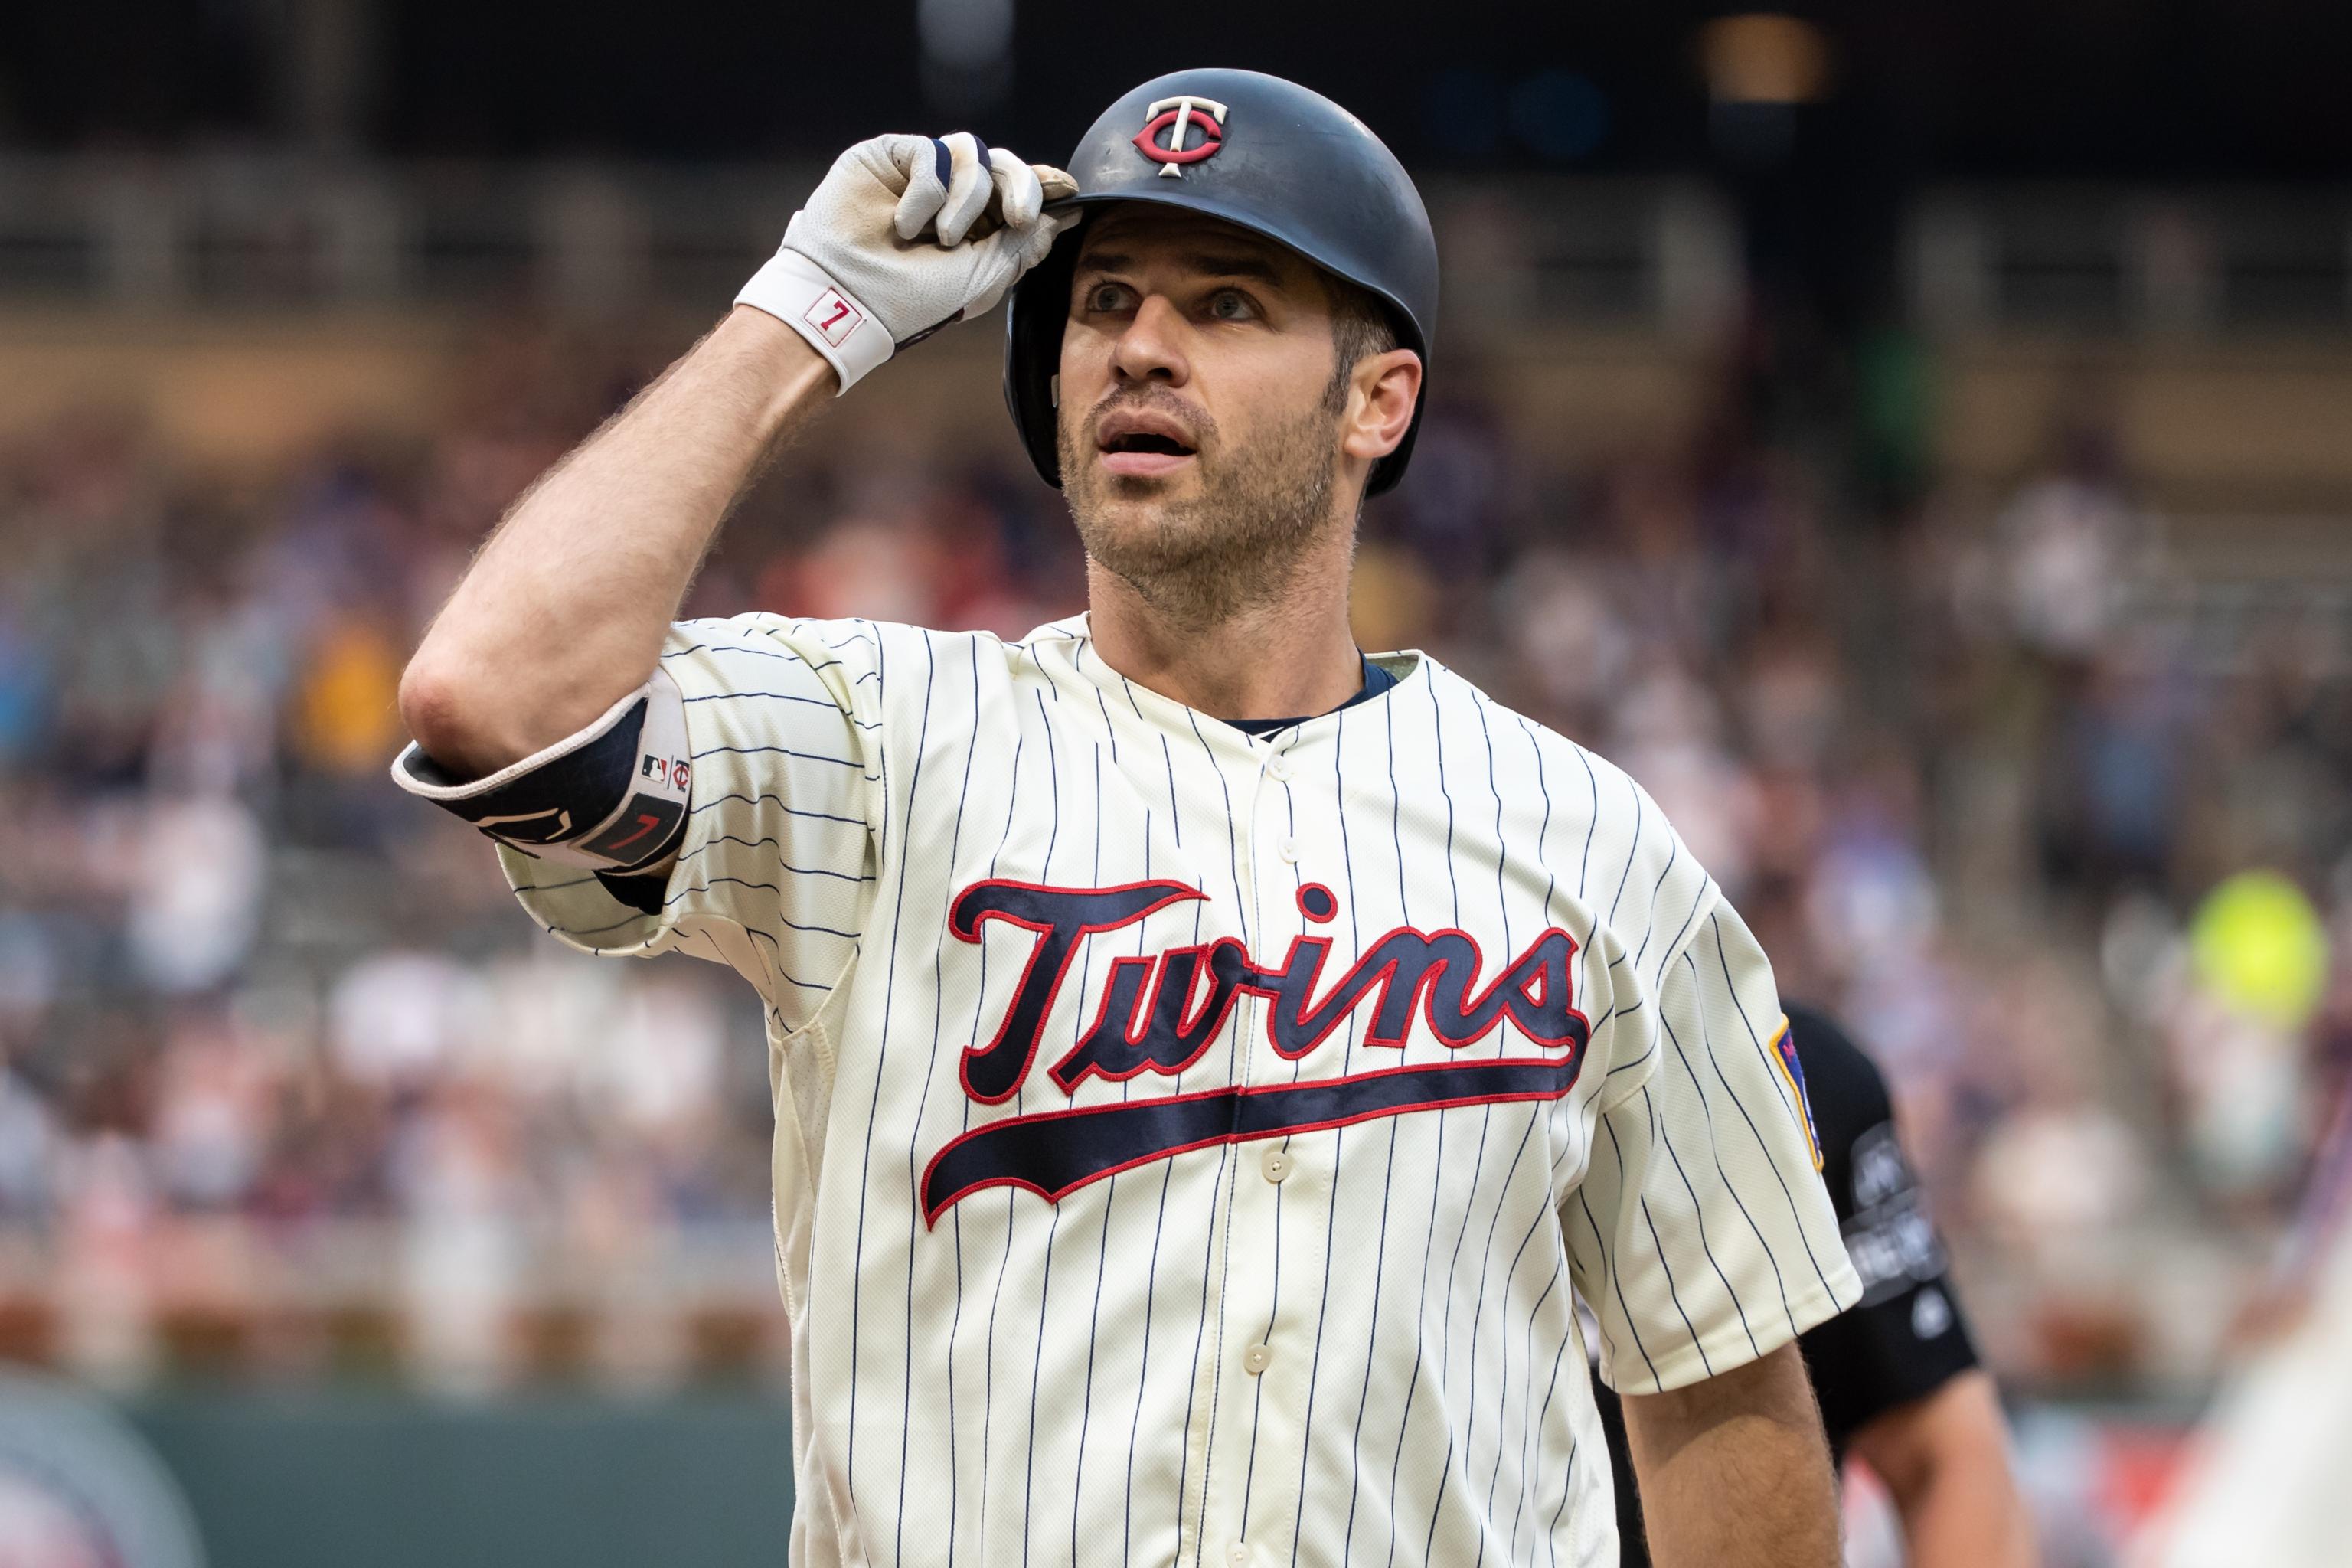 MLB draft preview: Twins hoping for more Joe Mauer magic with No. 1 pick